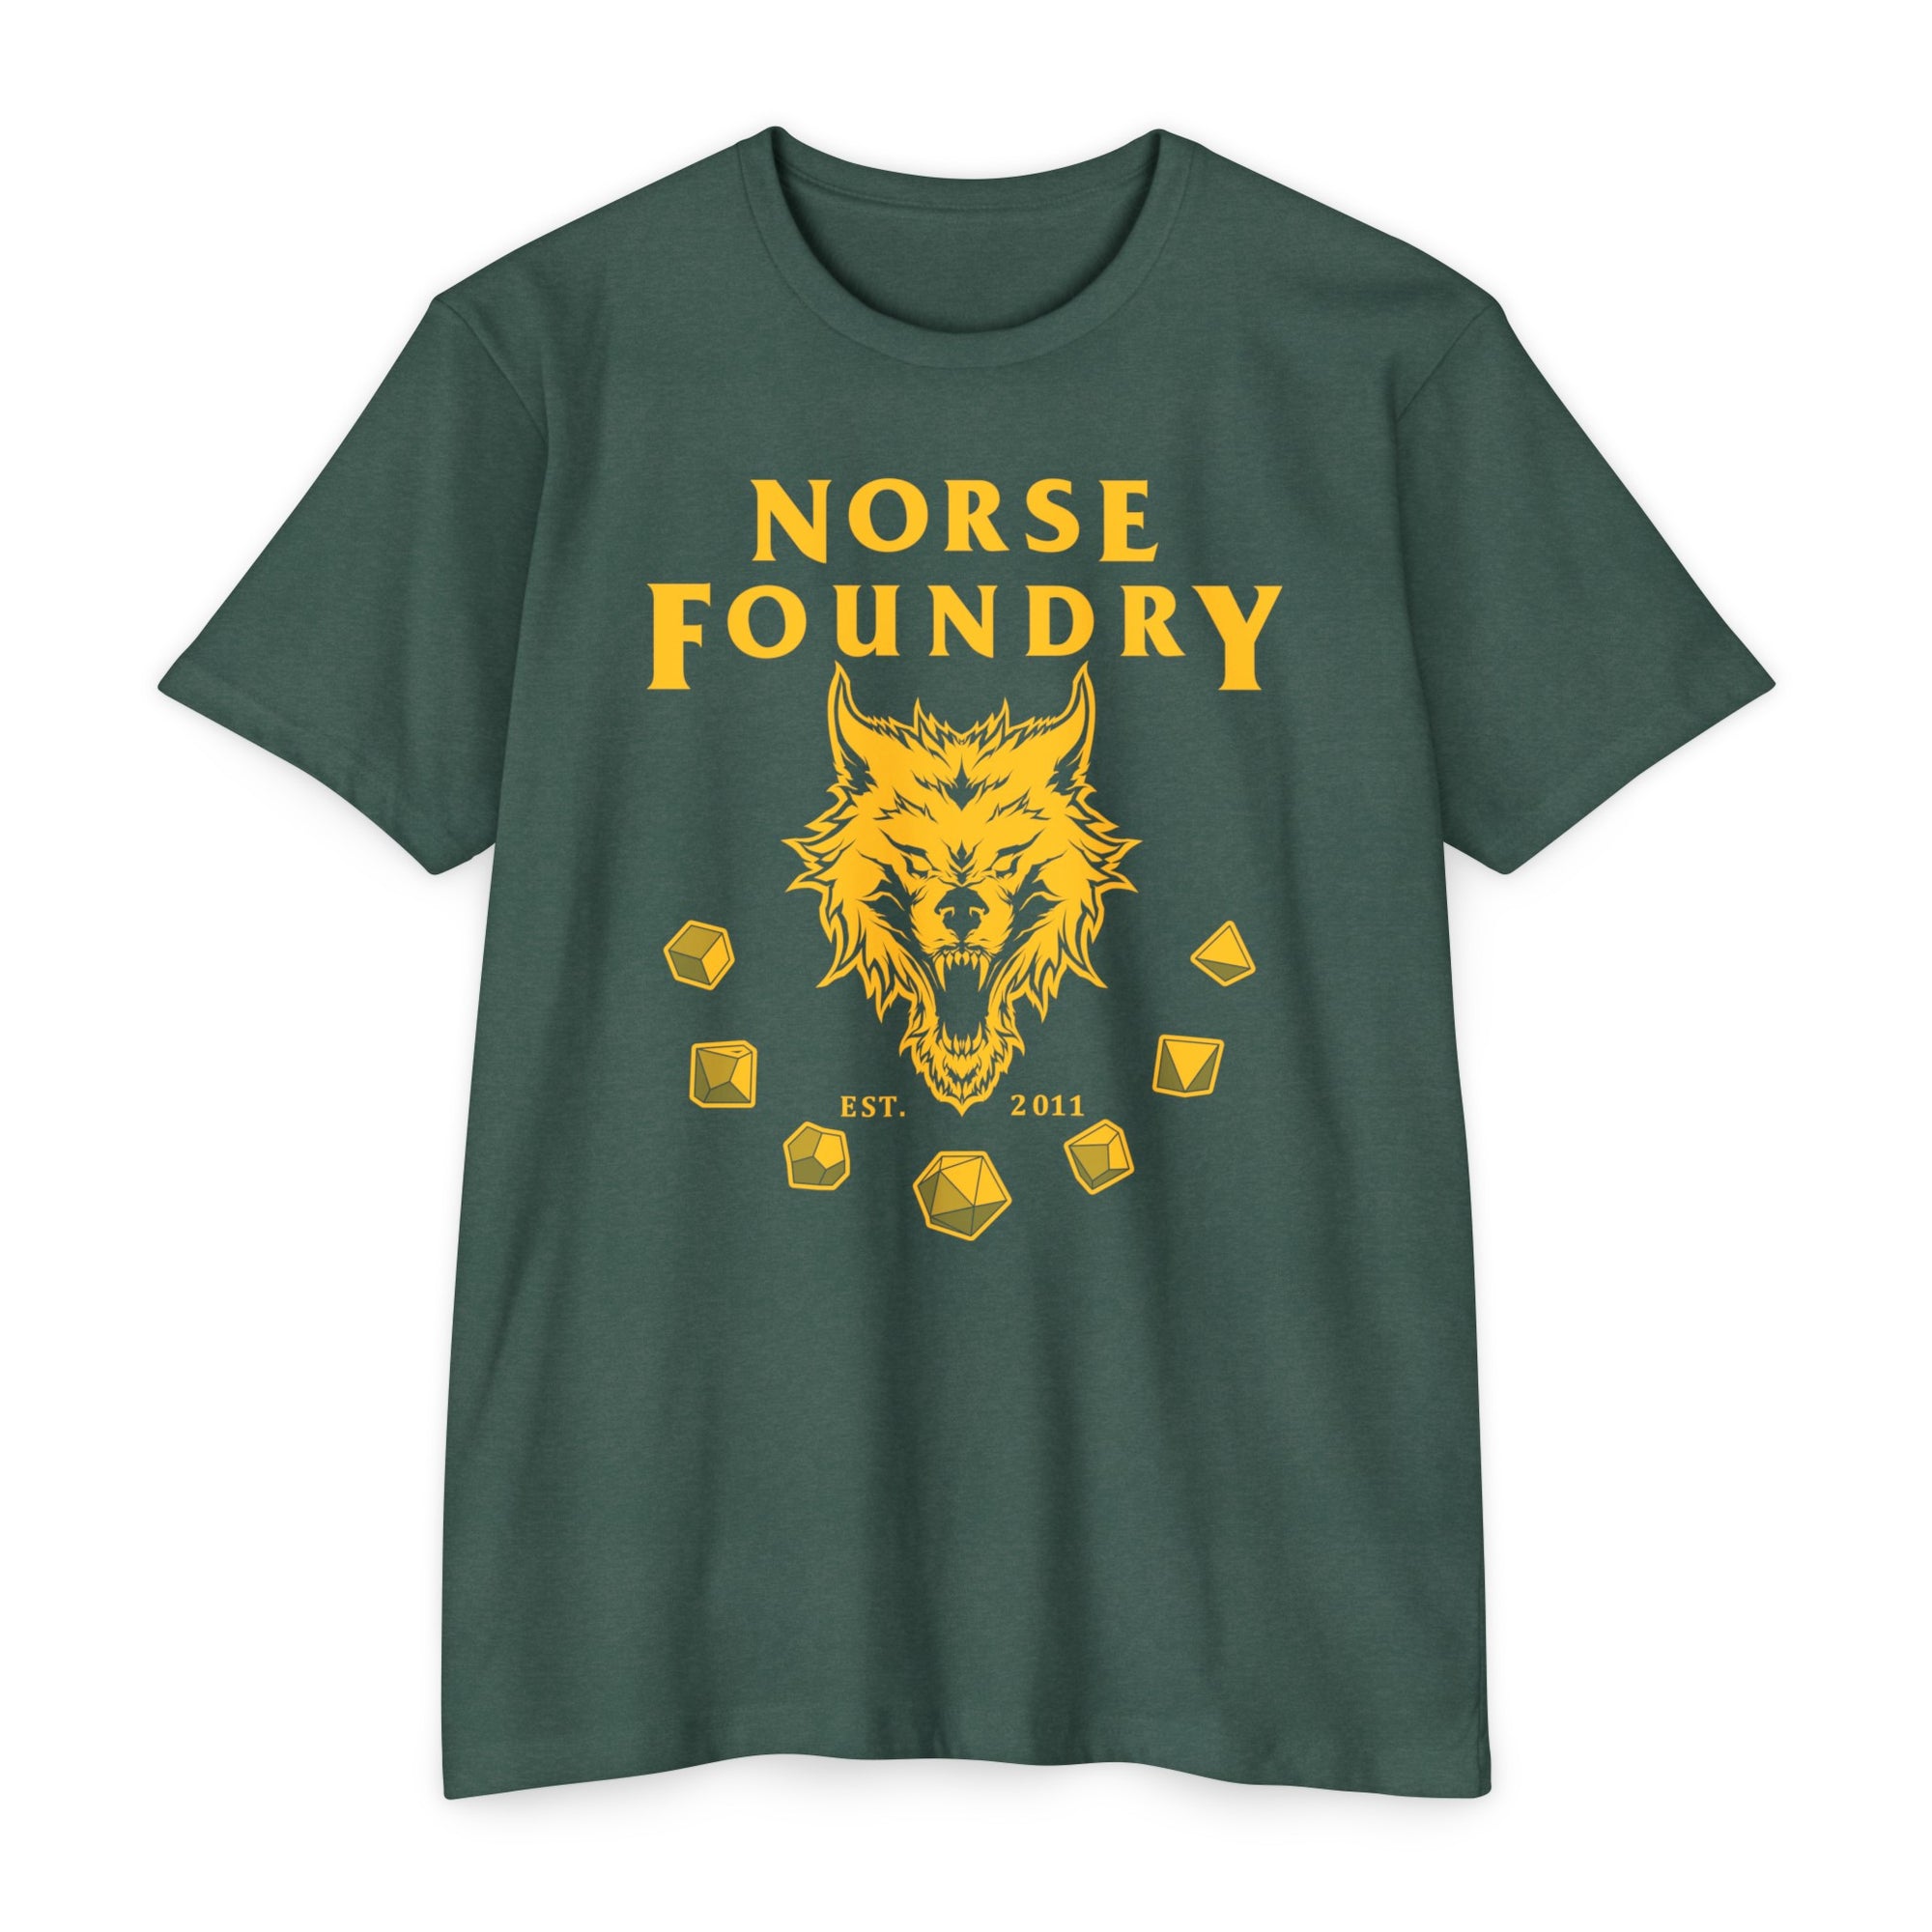 Green and Yellow - Norse Foundry T-Shirt